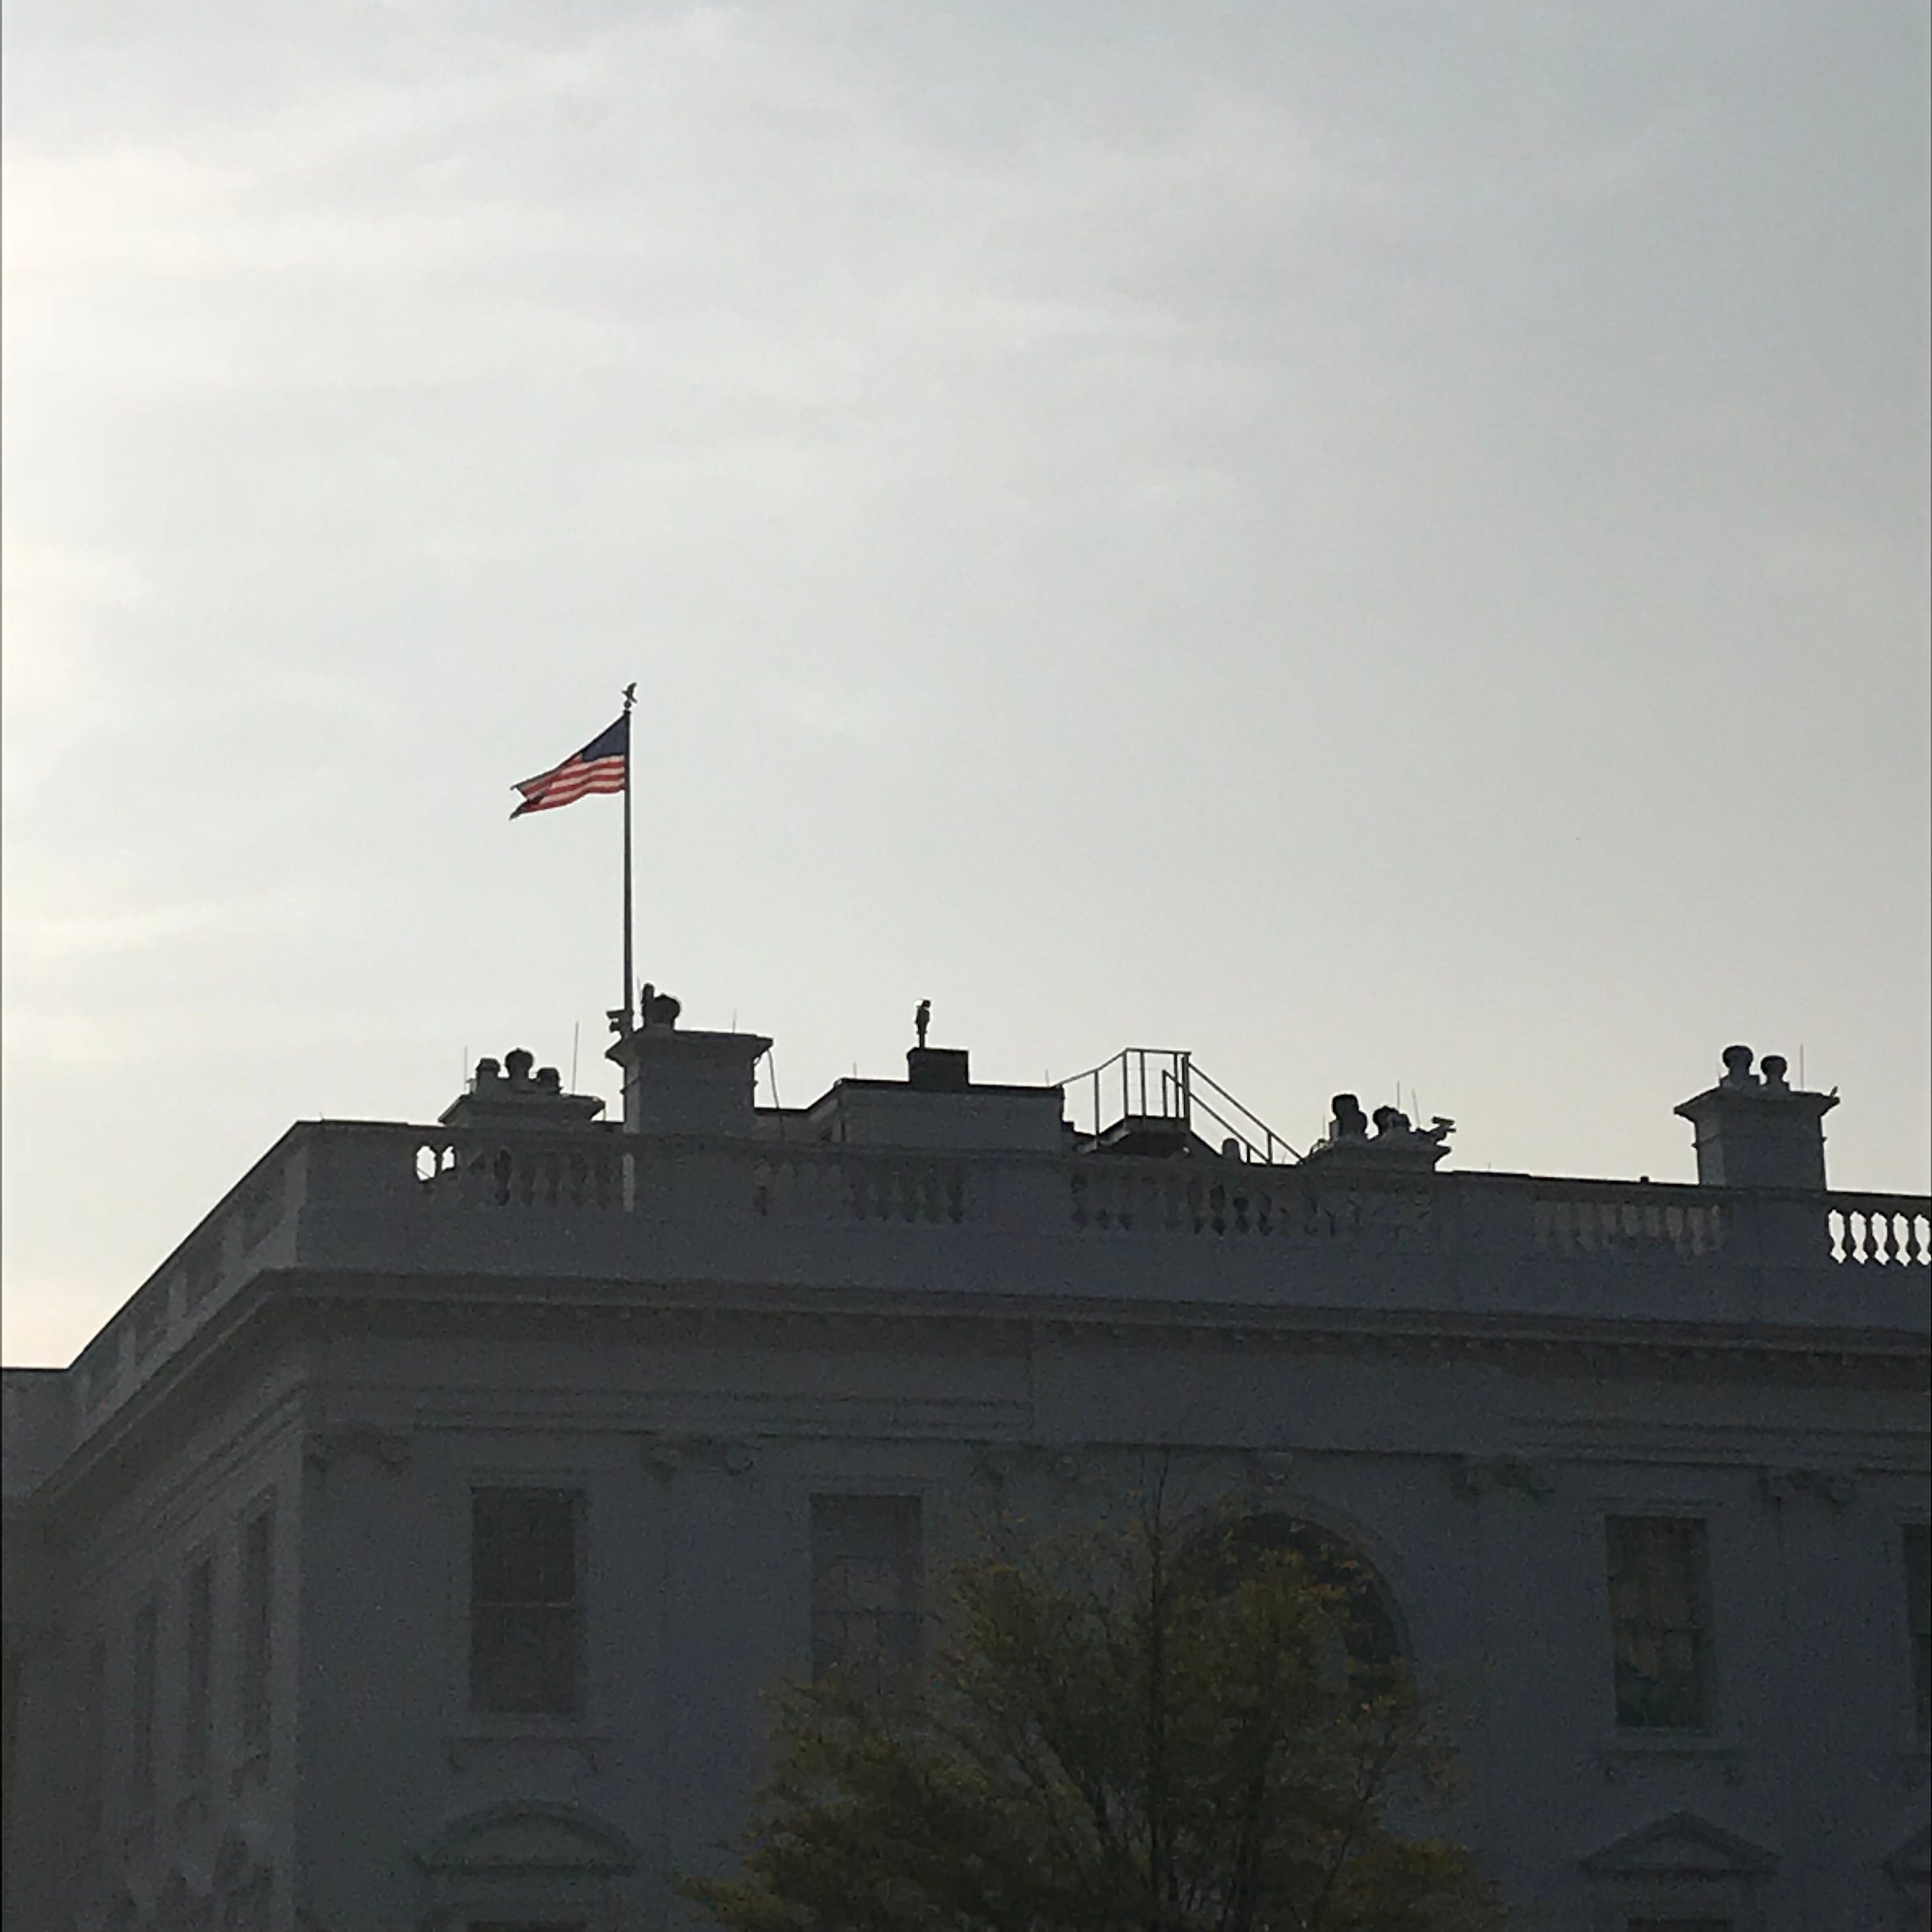 The U.S. flag flies full staff at the White House on Monday, Aug. 27, less than two days after Sen. John McCain died.